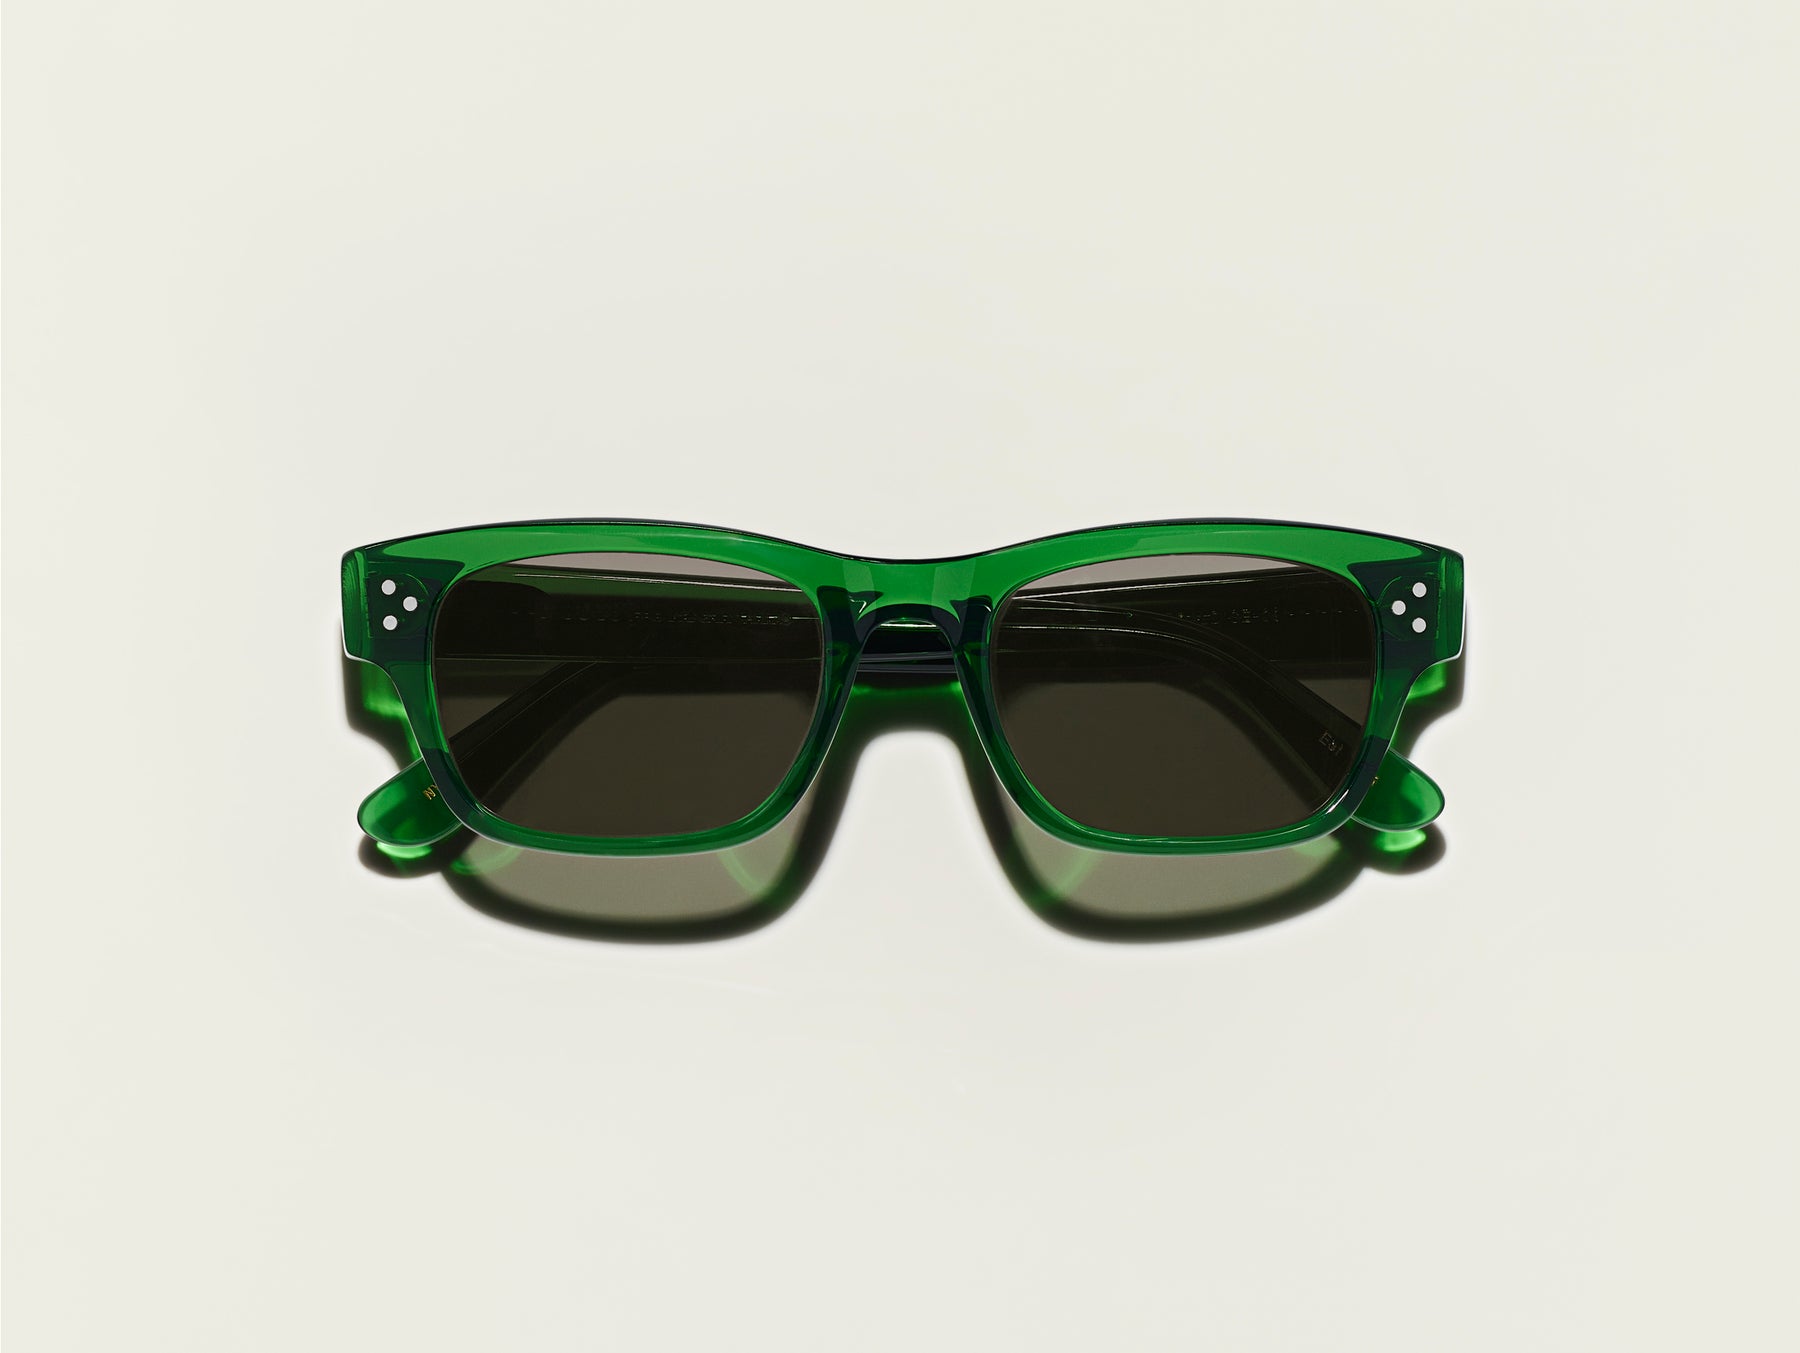 The HYMAN SUN in Emerald with G-15 Glass Lenses